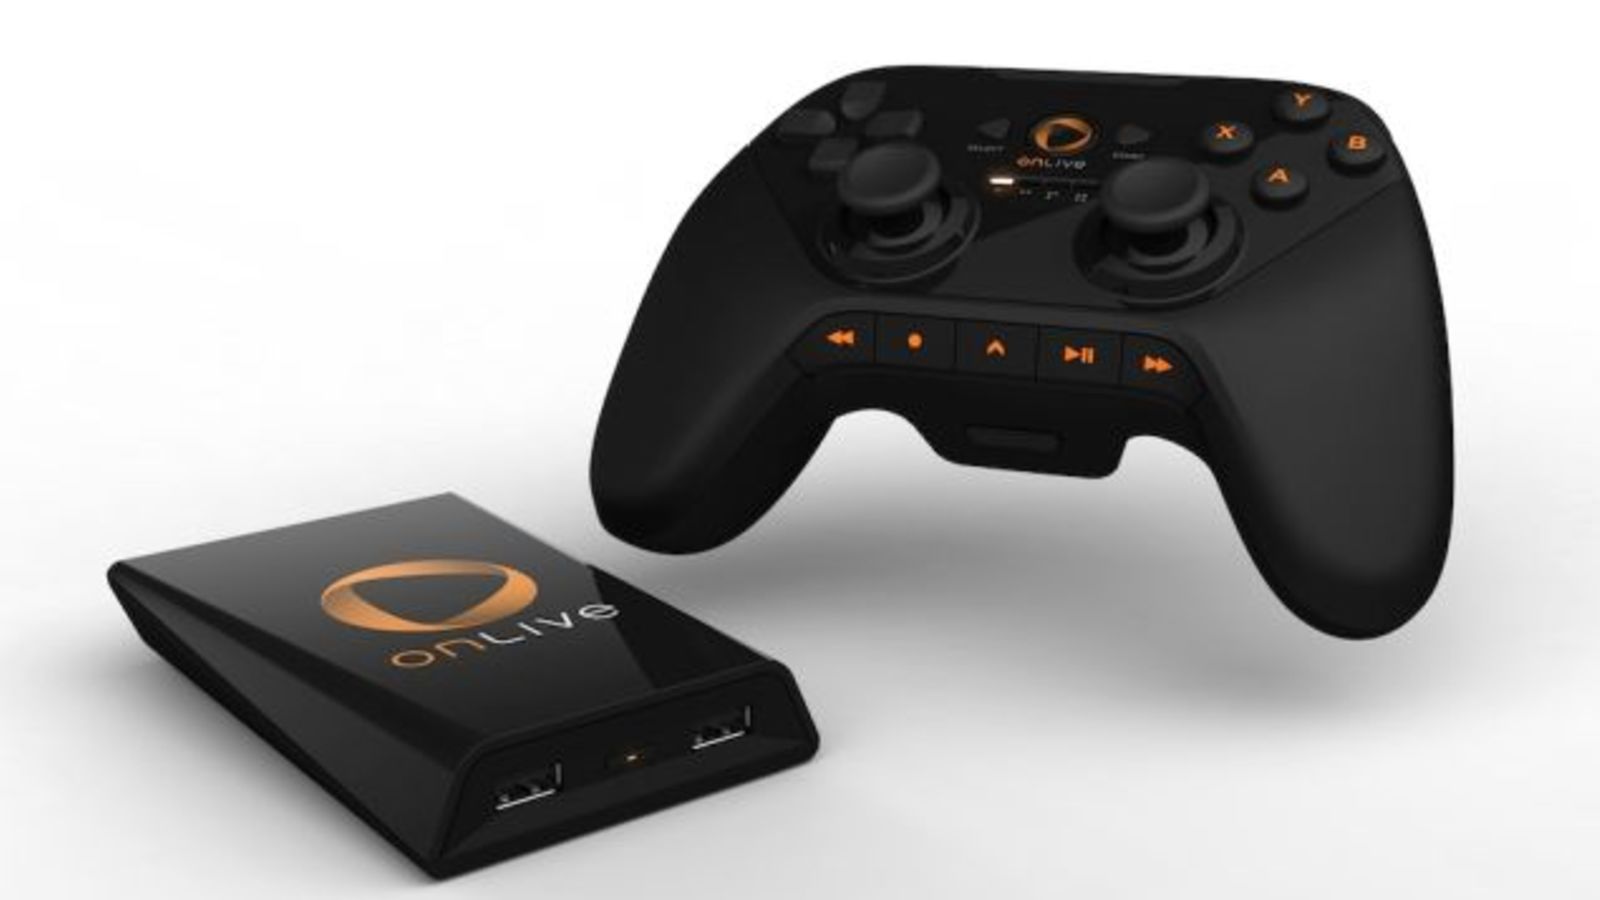 OnLive console and controller